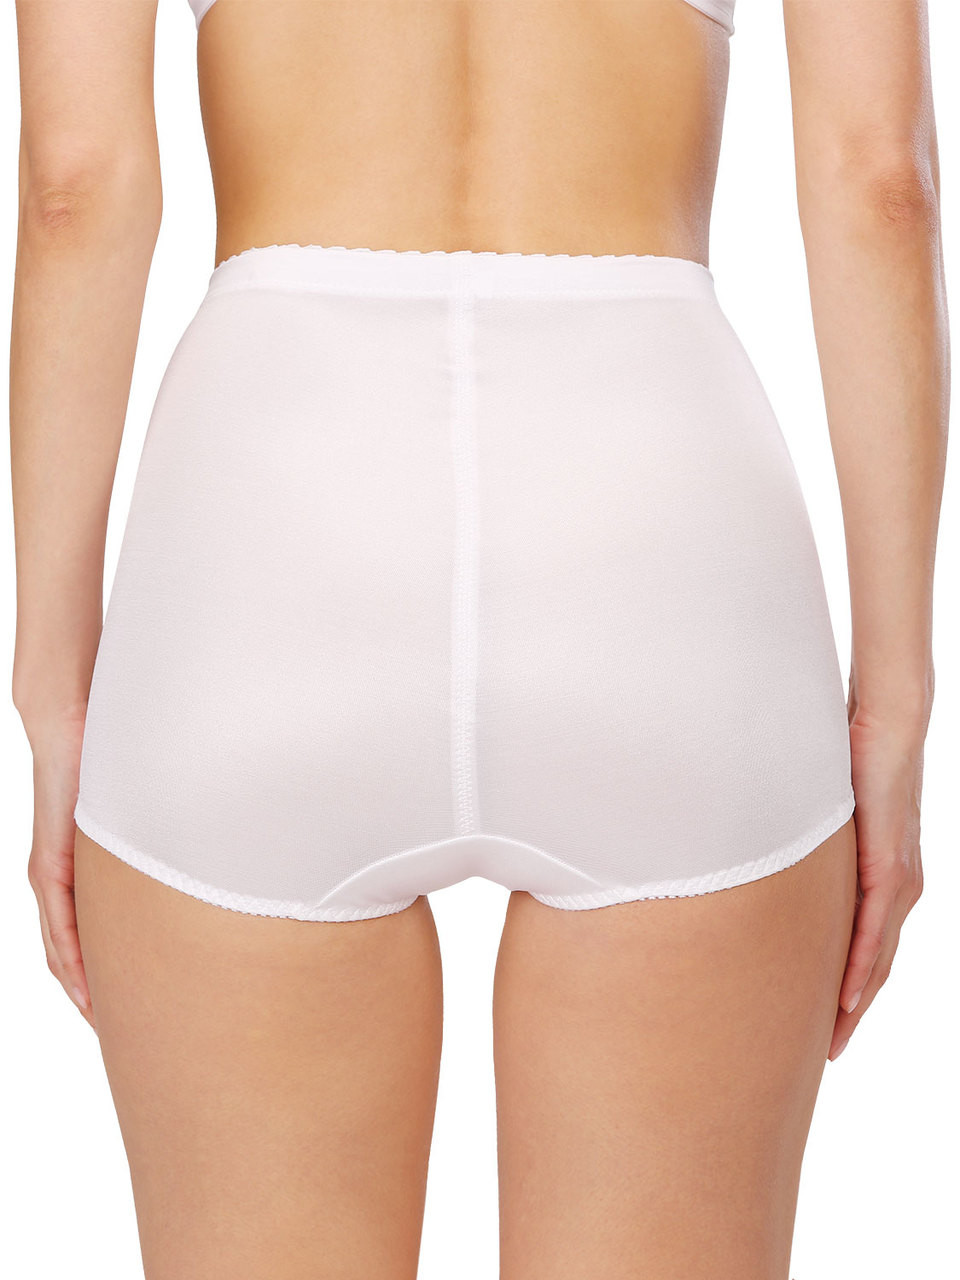 Naturana Double Reinforced Front Panty Girdle with Supporting